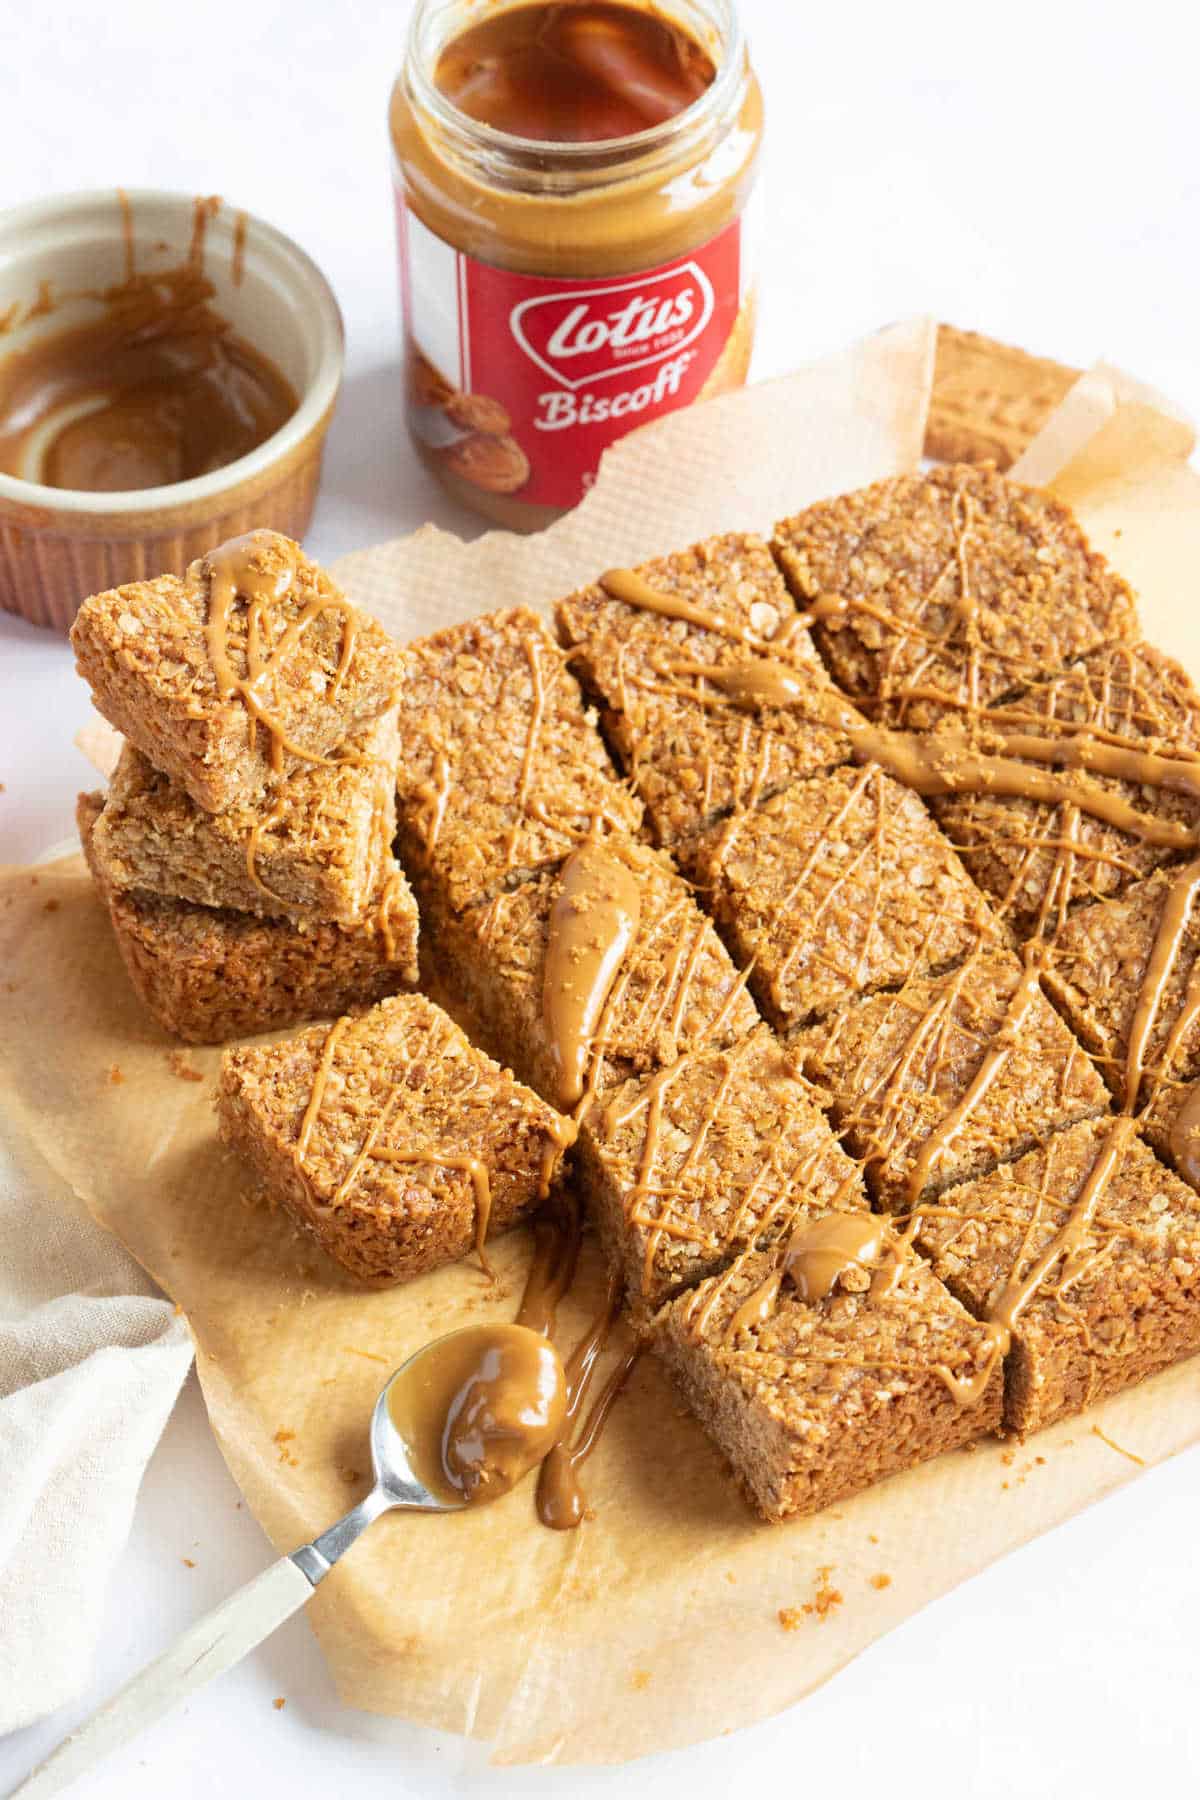 Biscoff flapjacks cut into squares and drizzled with more biscoff spread.